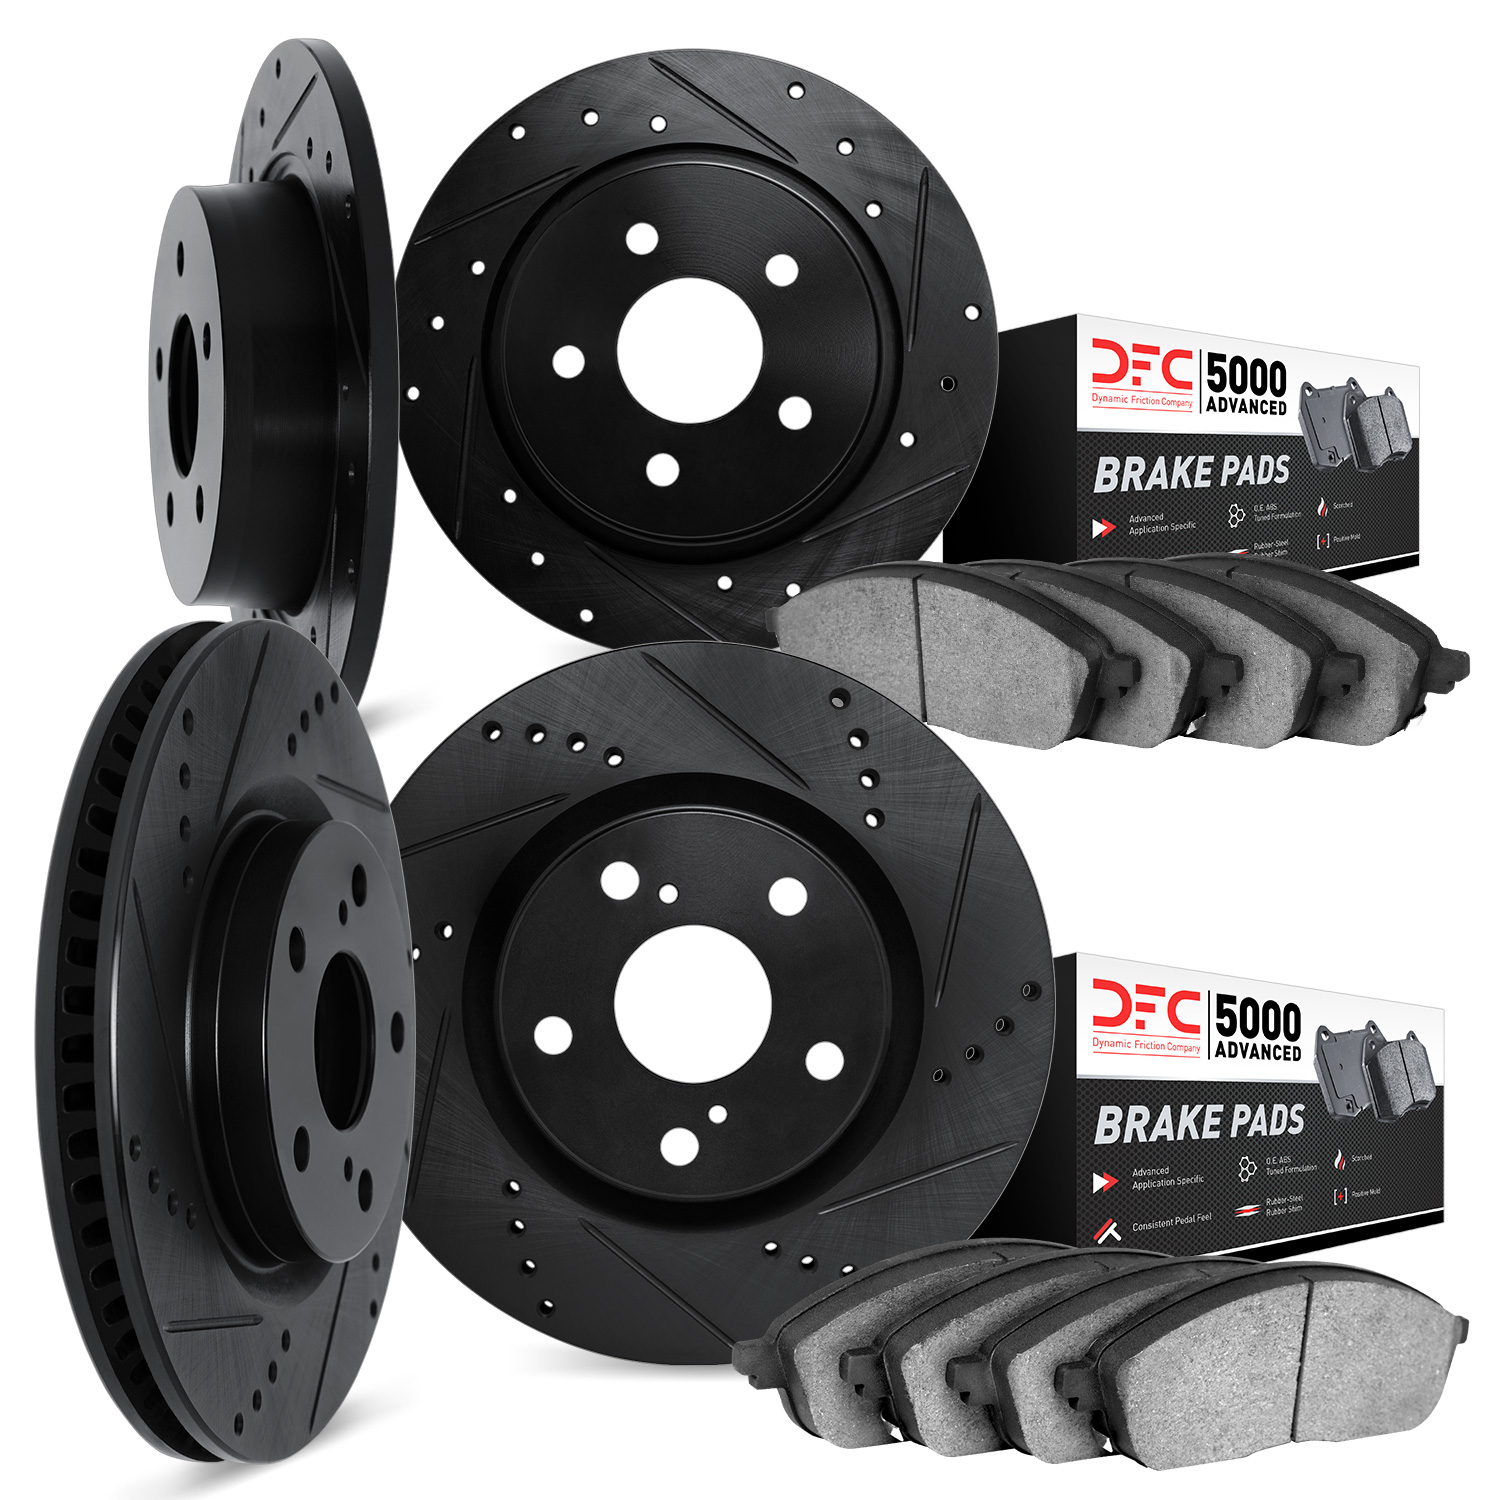 8504-74064 Drilled/Slotted Brake Rotors w/5000 Advanced Brake Pads Kit [Black], 2015-2018 Audi/Volkswagen, Position: Front and R